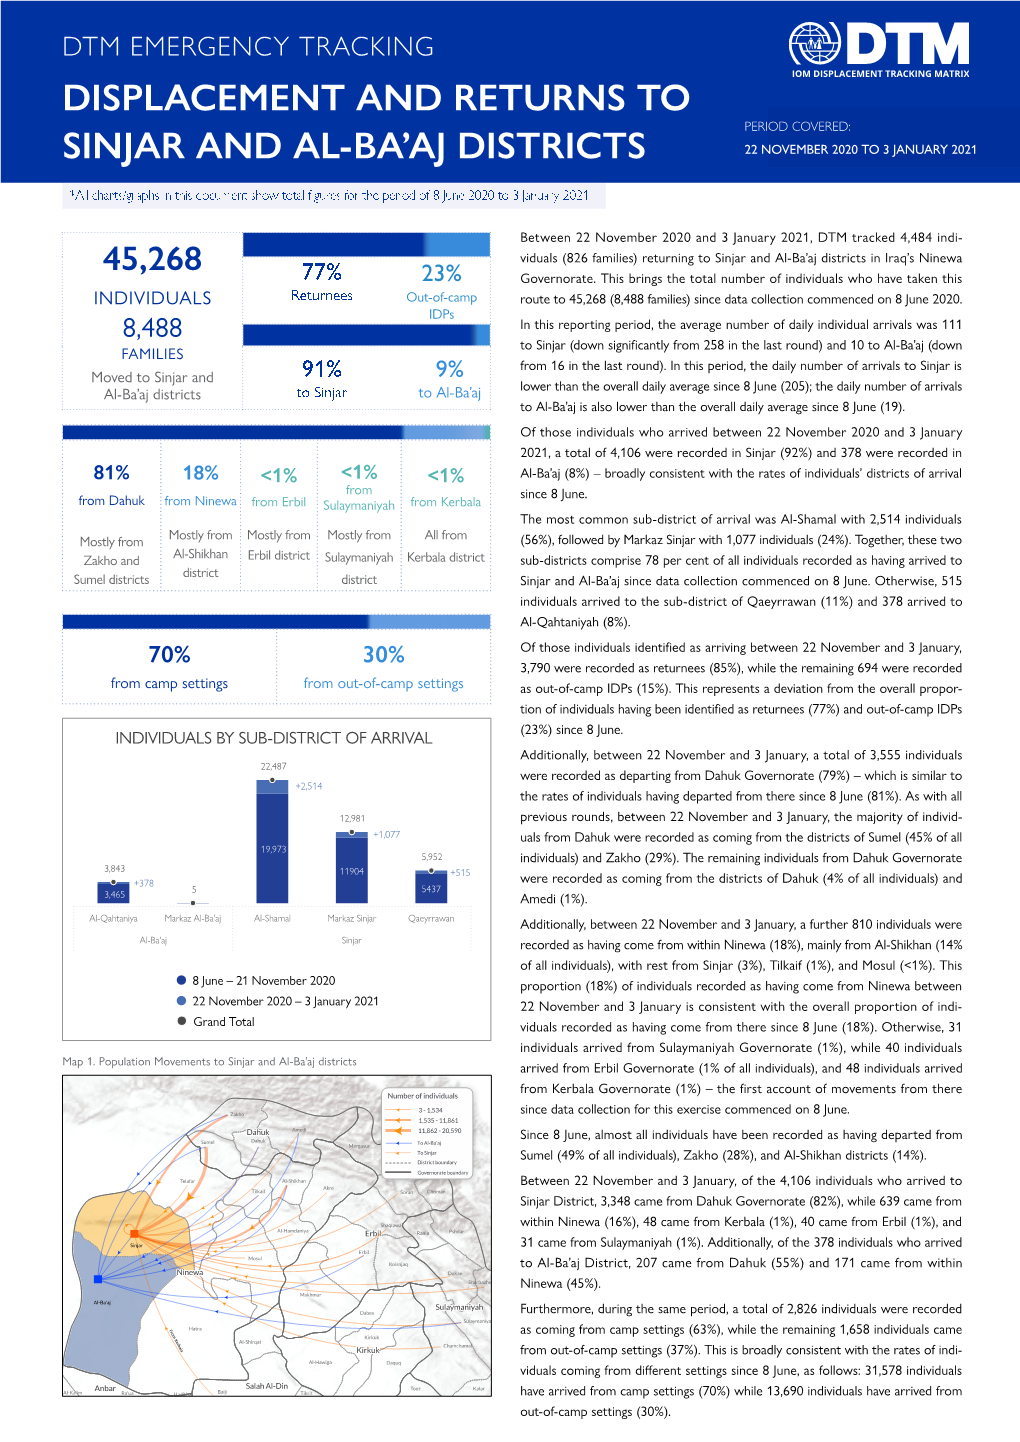 DISPLACEMENT and RETURNS to SINJAR and BAAJ DISTRICTS 03 Jan 2021